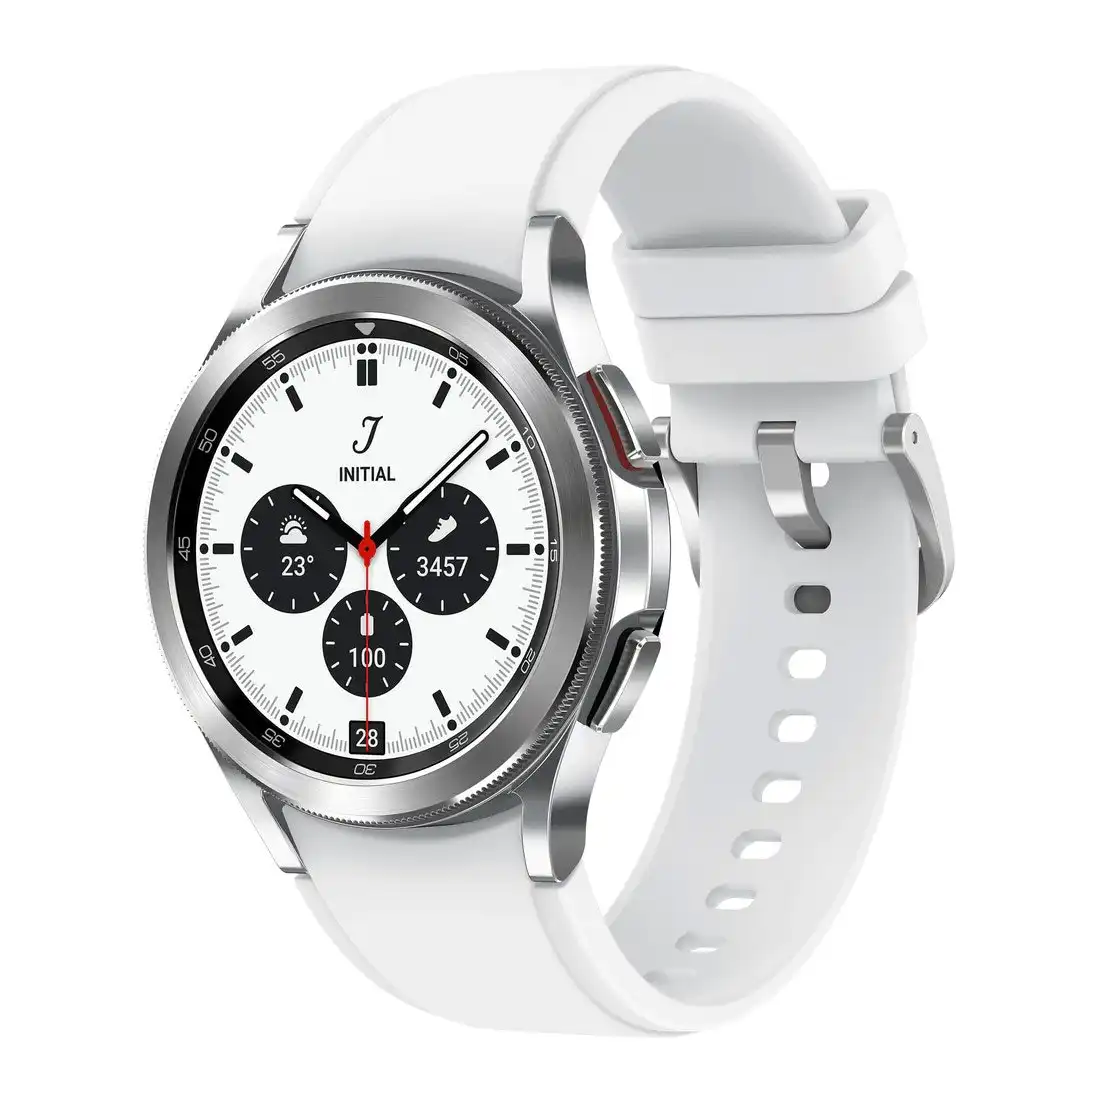 Samsung Galaxy Watch 4 Classic LTE 42mm Silver [Refurbished] - Excellent